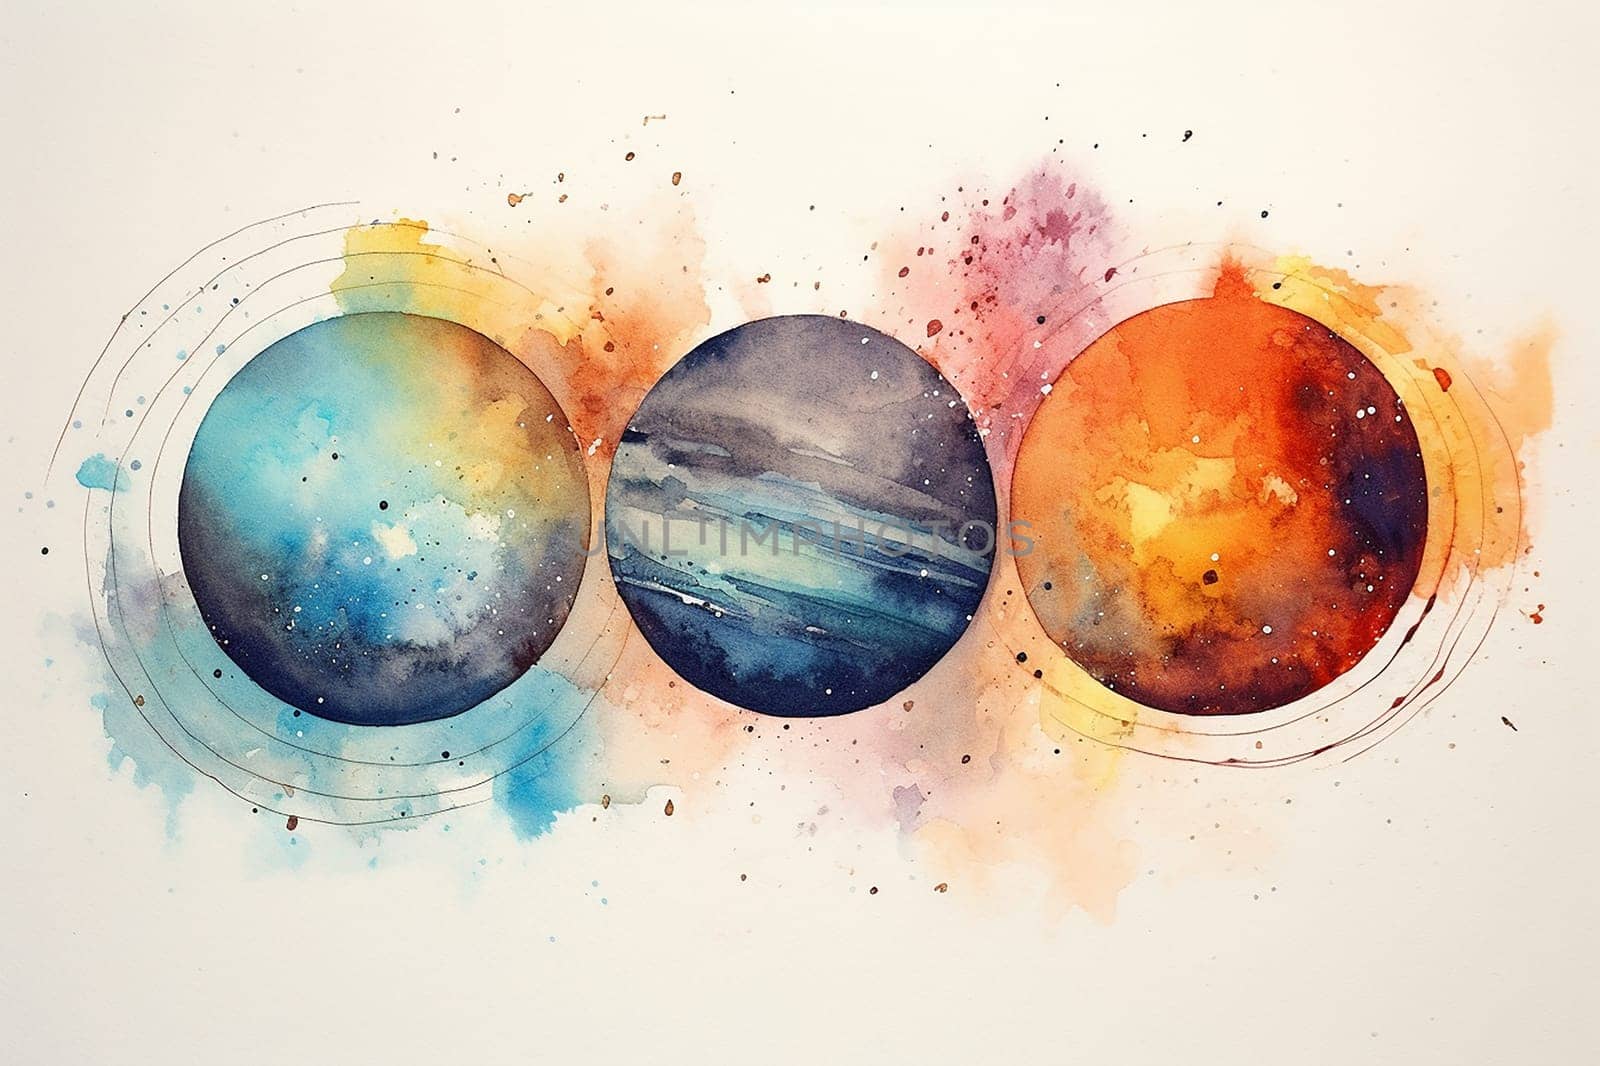 Artistic representation of planets in various colors against a starry background